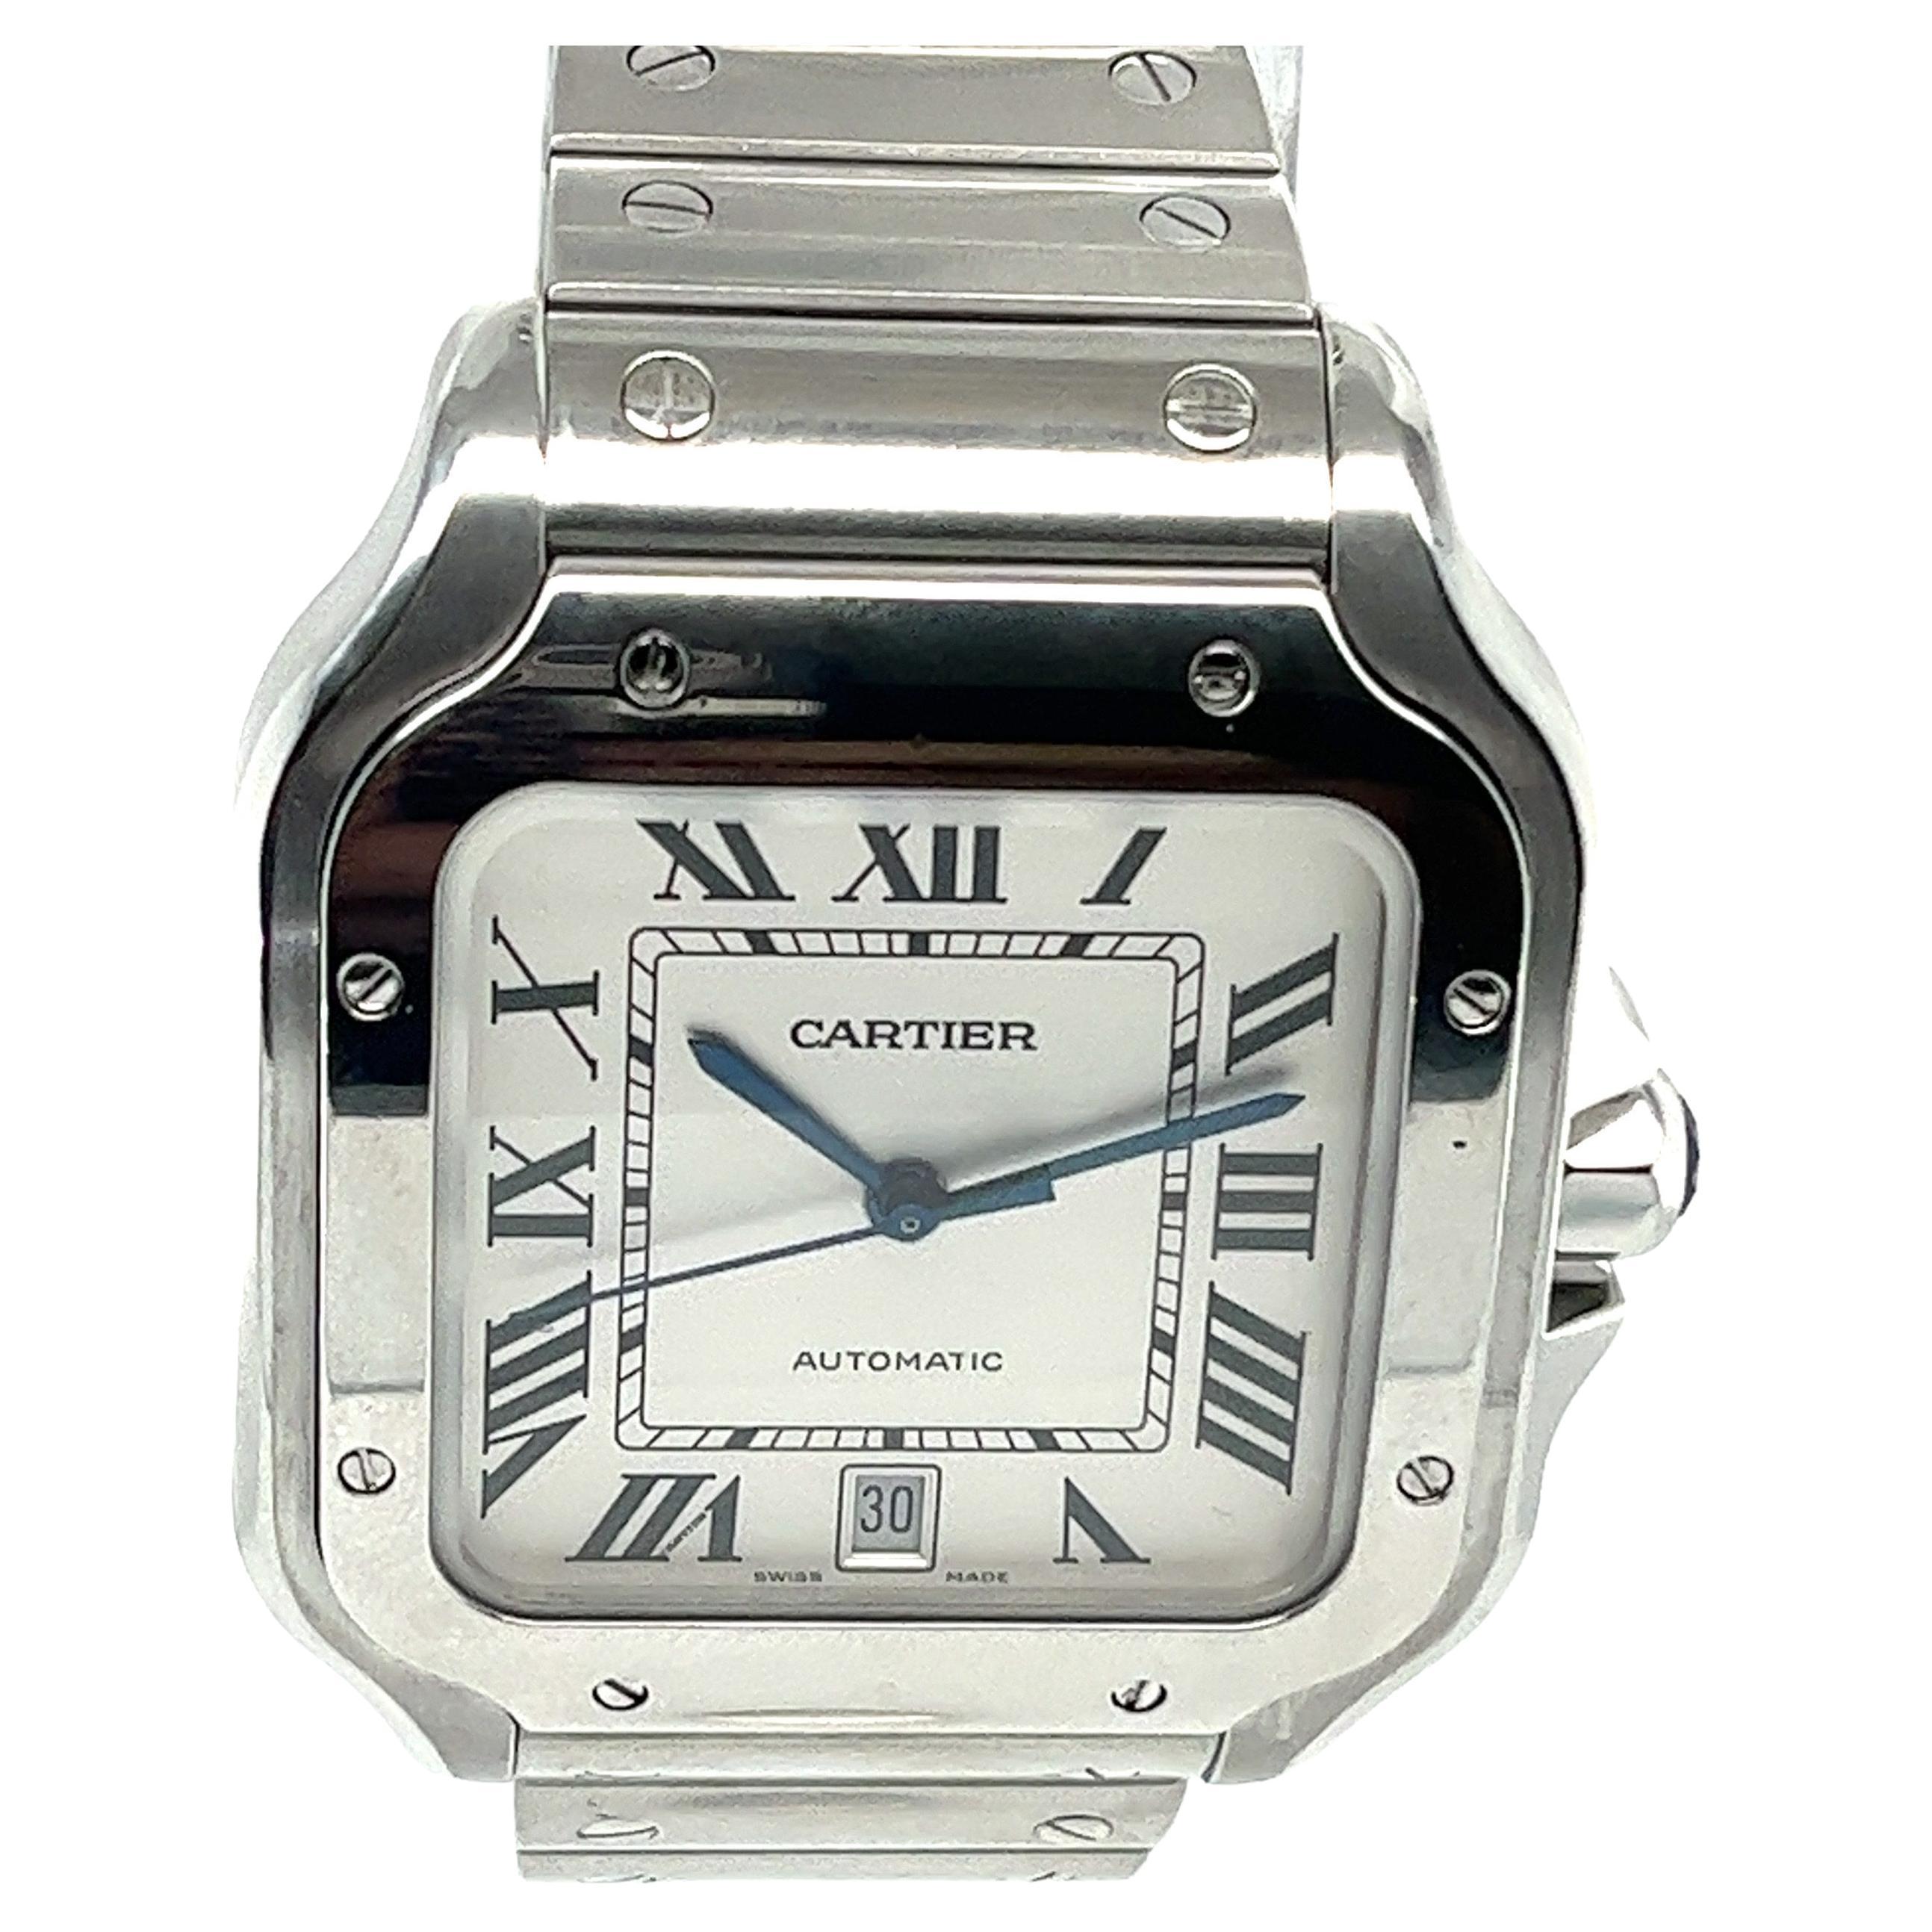 This pre-owned Cartier Santos in stainless steel features silver opaline dial with Roman numerals and date at 6 o’clock. Crafted with  Cartier stainless steel bracelet and has a  deploying buckle. Fits up to 7-1/2 inch wrist. Has a large face with